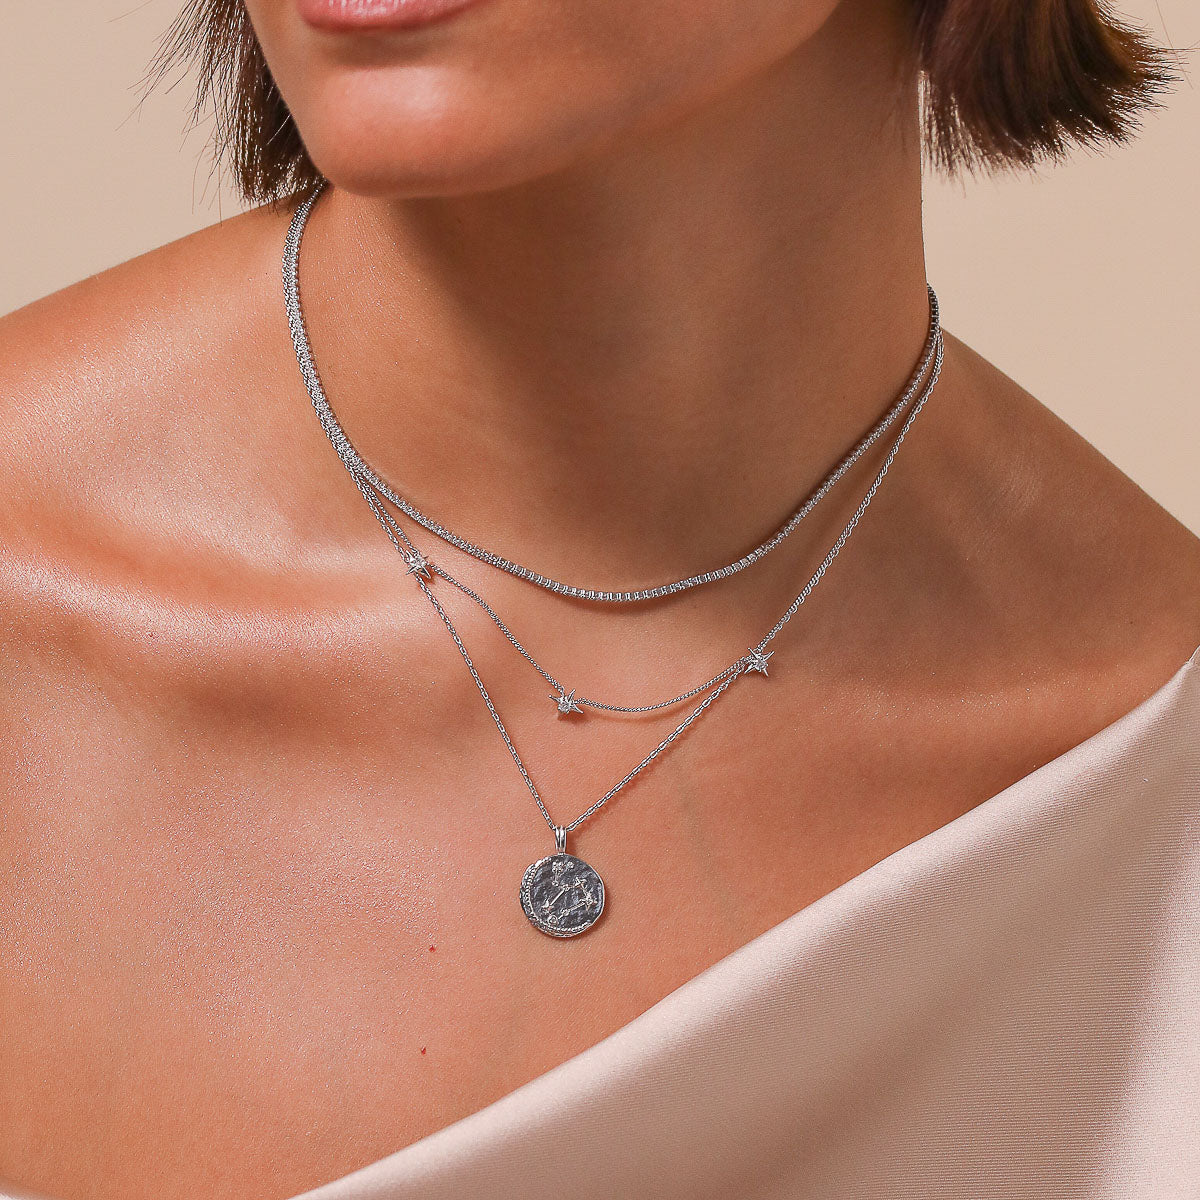 Leo Zodiac Pendant Necklace in Silver worn layered with necklaces